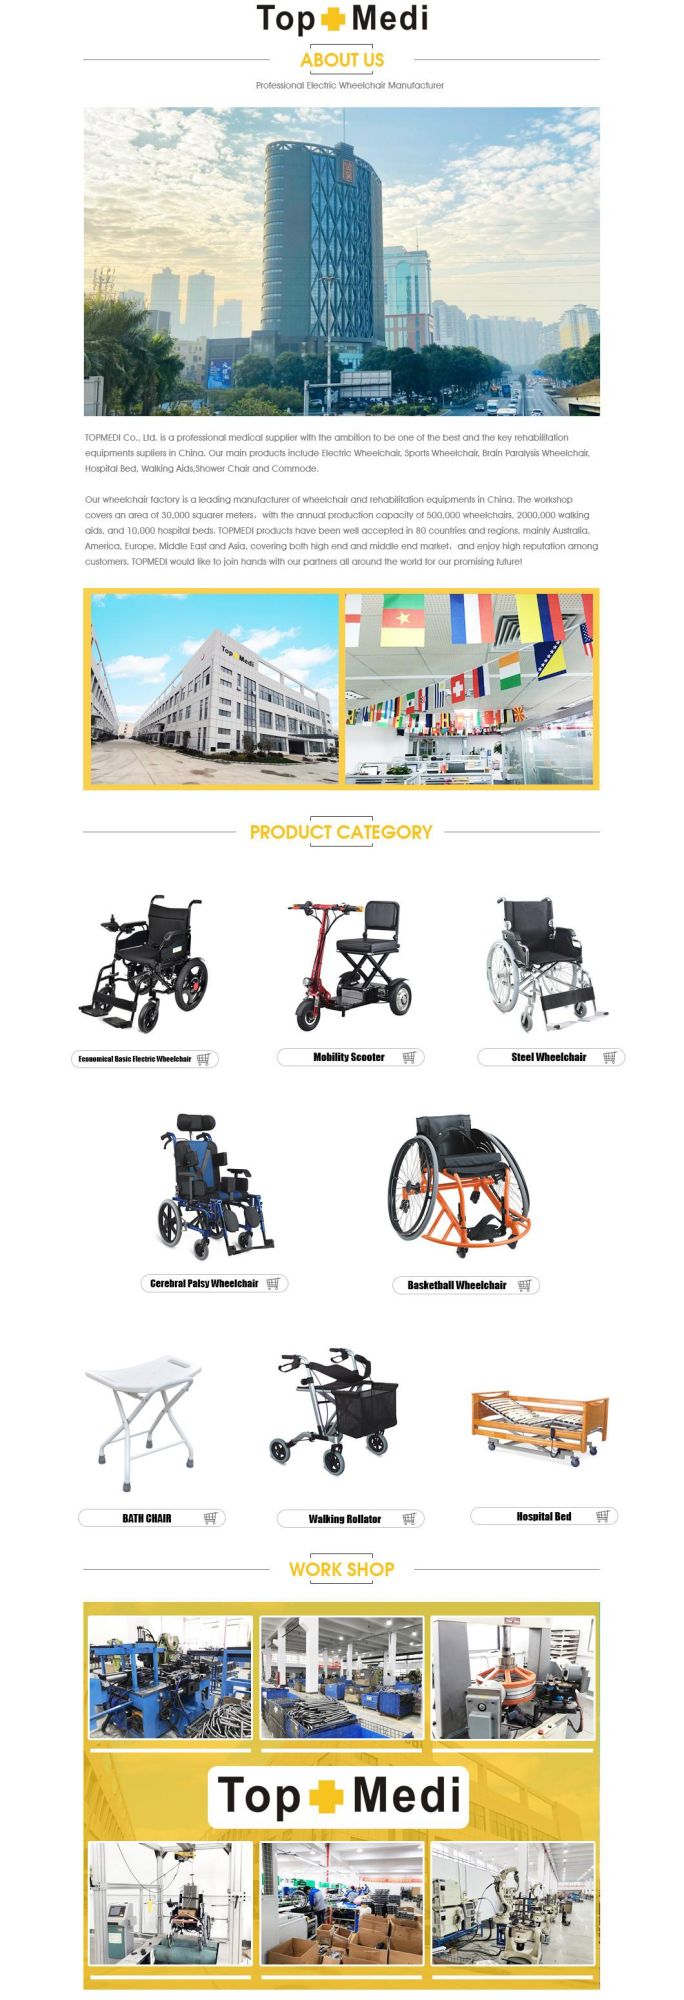 Topmedi Hotsale Foldable and Portable Four Wheels Mobility Scooter for Handicapped/ Elder